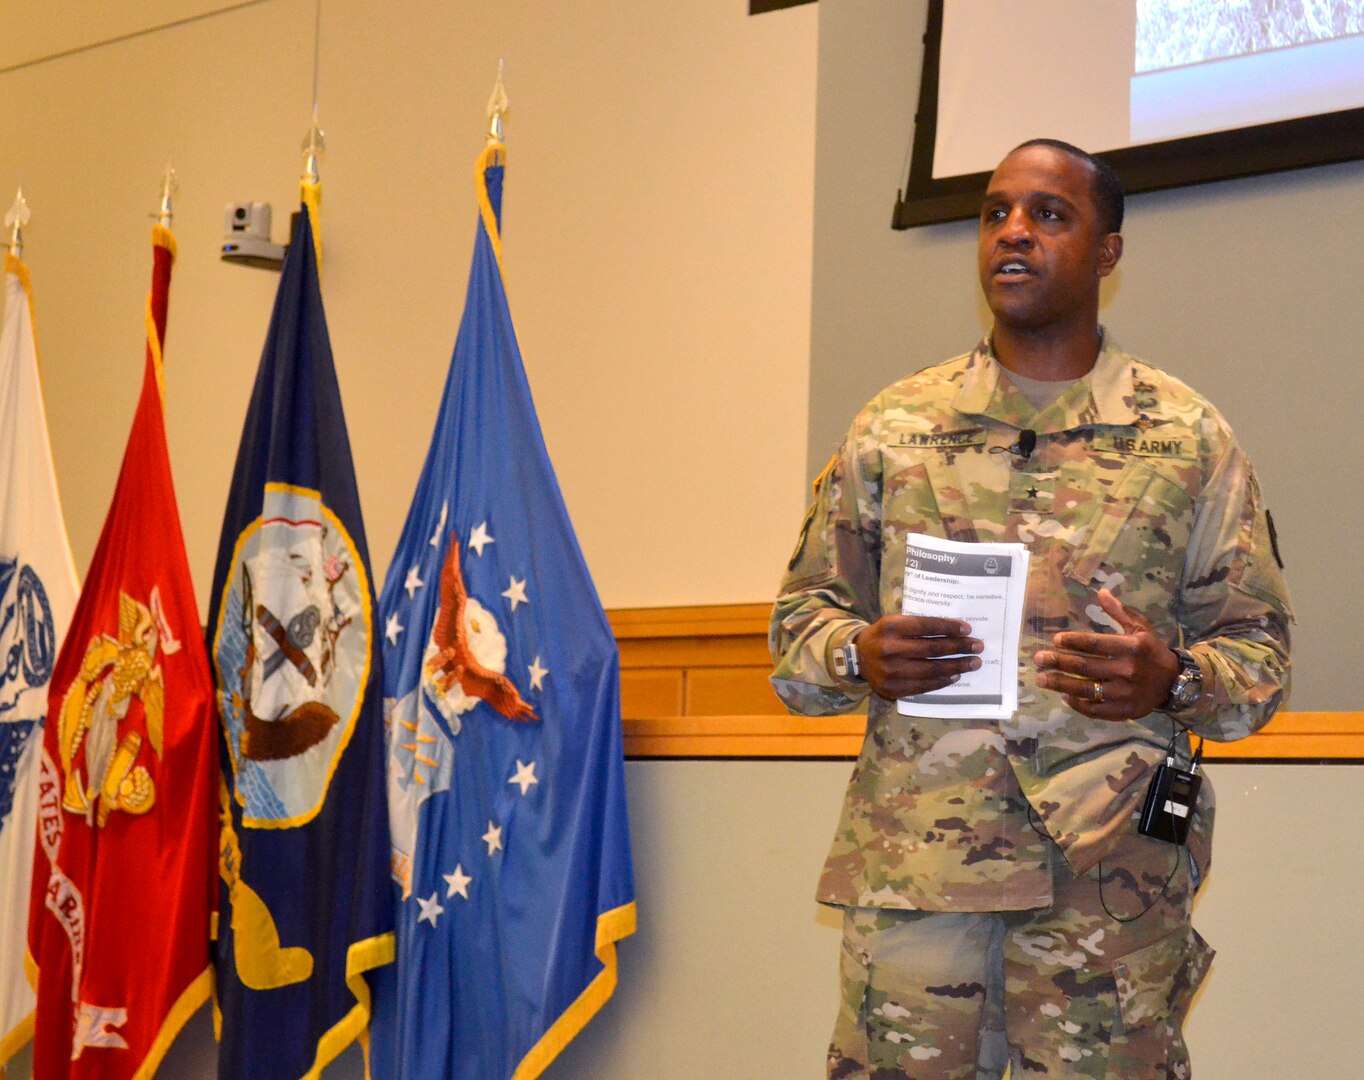 Army Brig. Gen. Lawrence talks to DLA Troop Support workforce at first town hall July 10